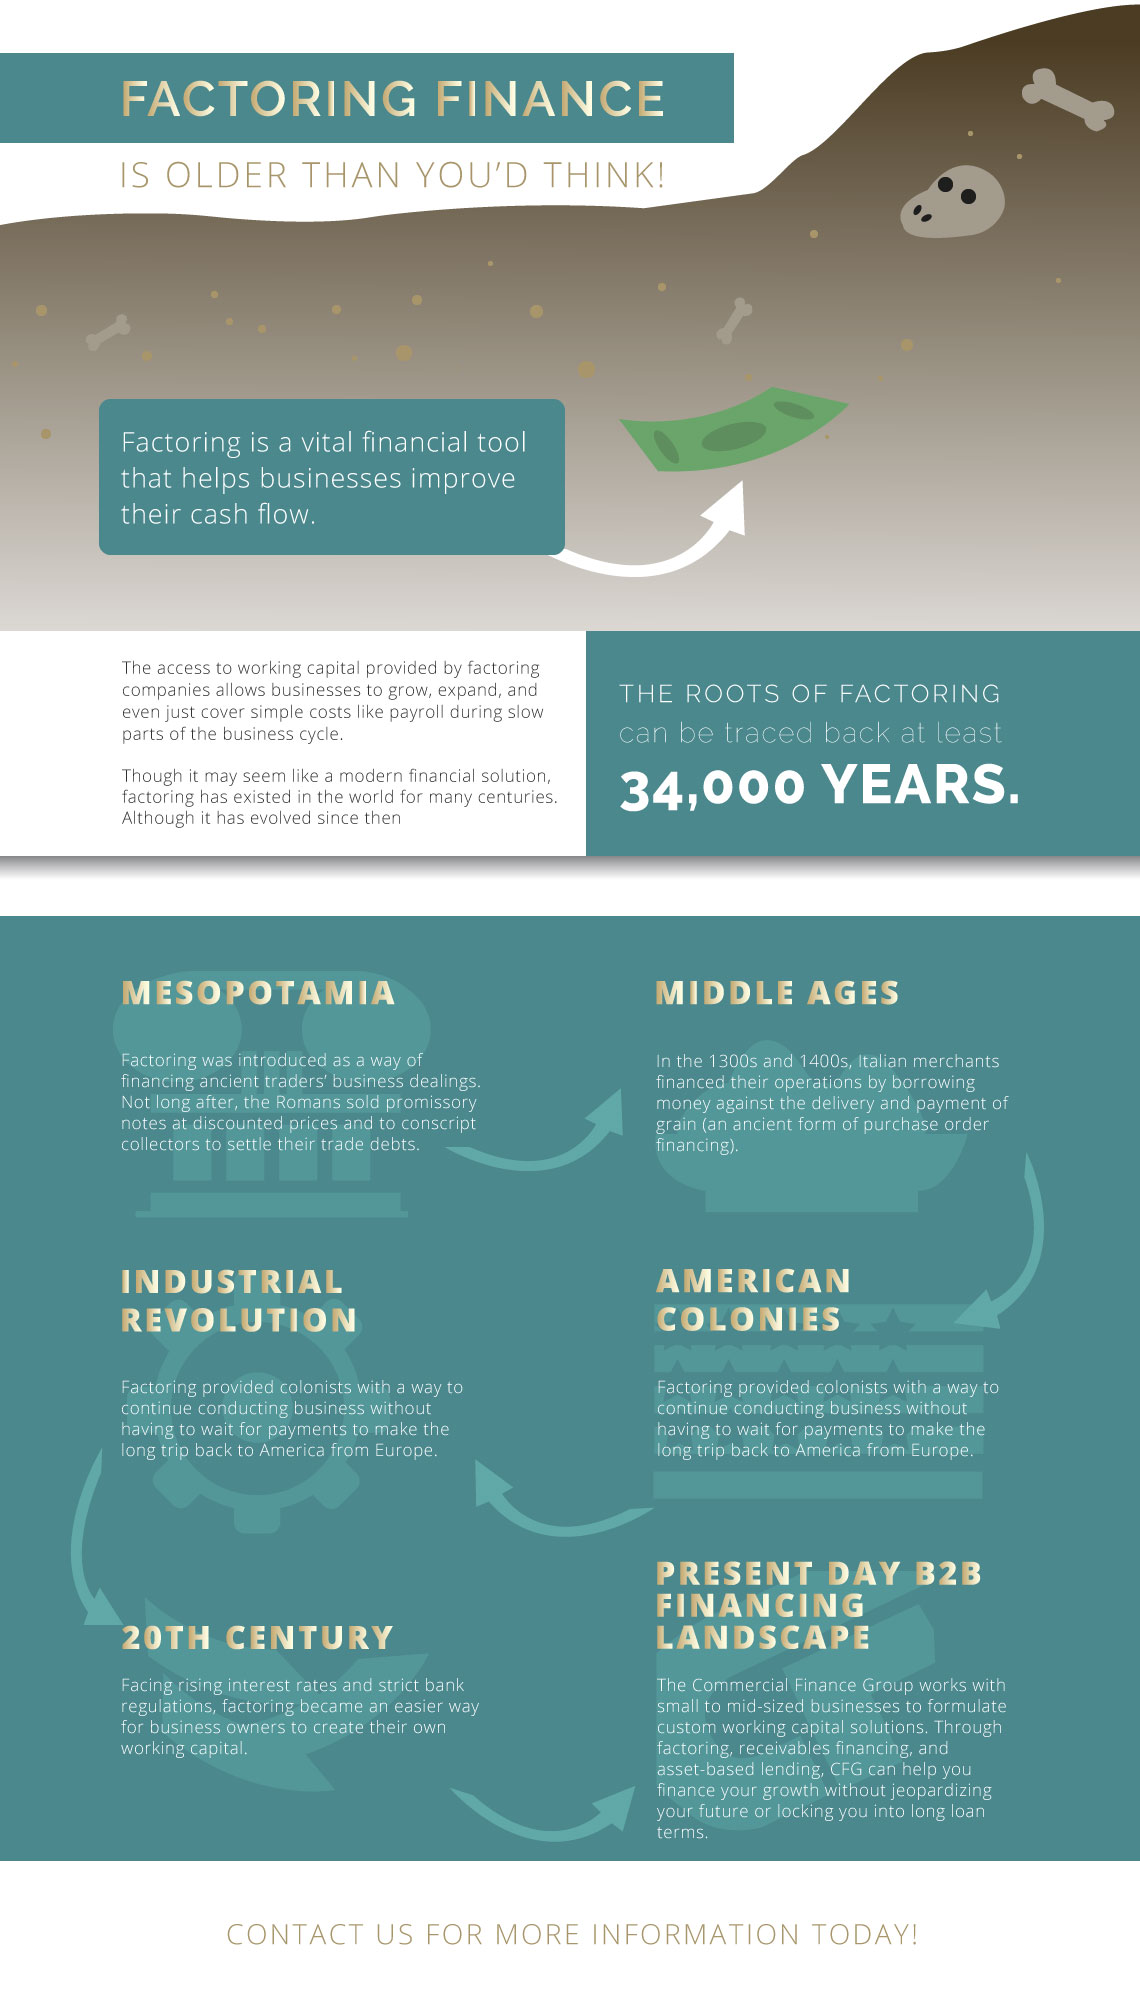 History of factoring infographic from Commercial Finance Group